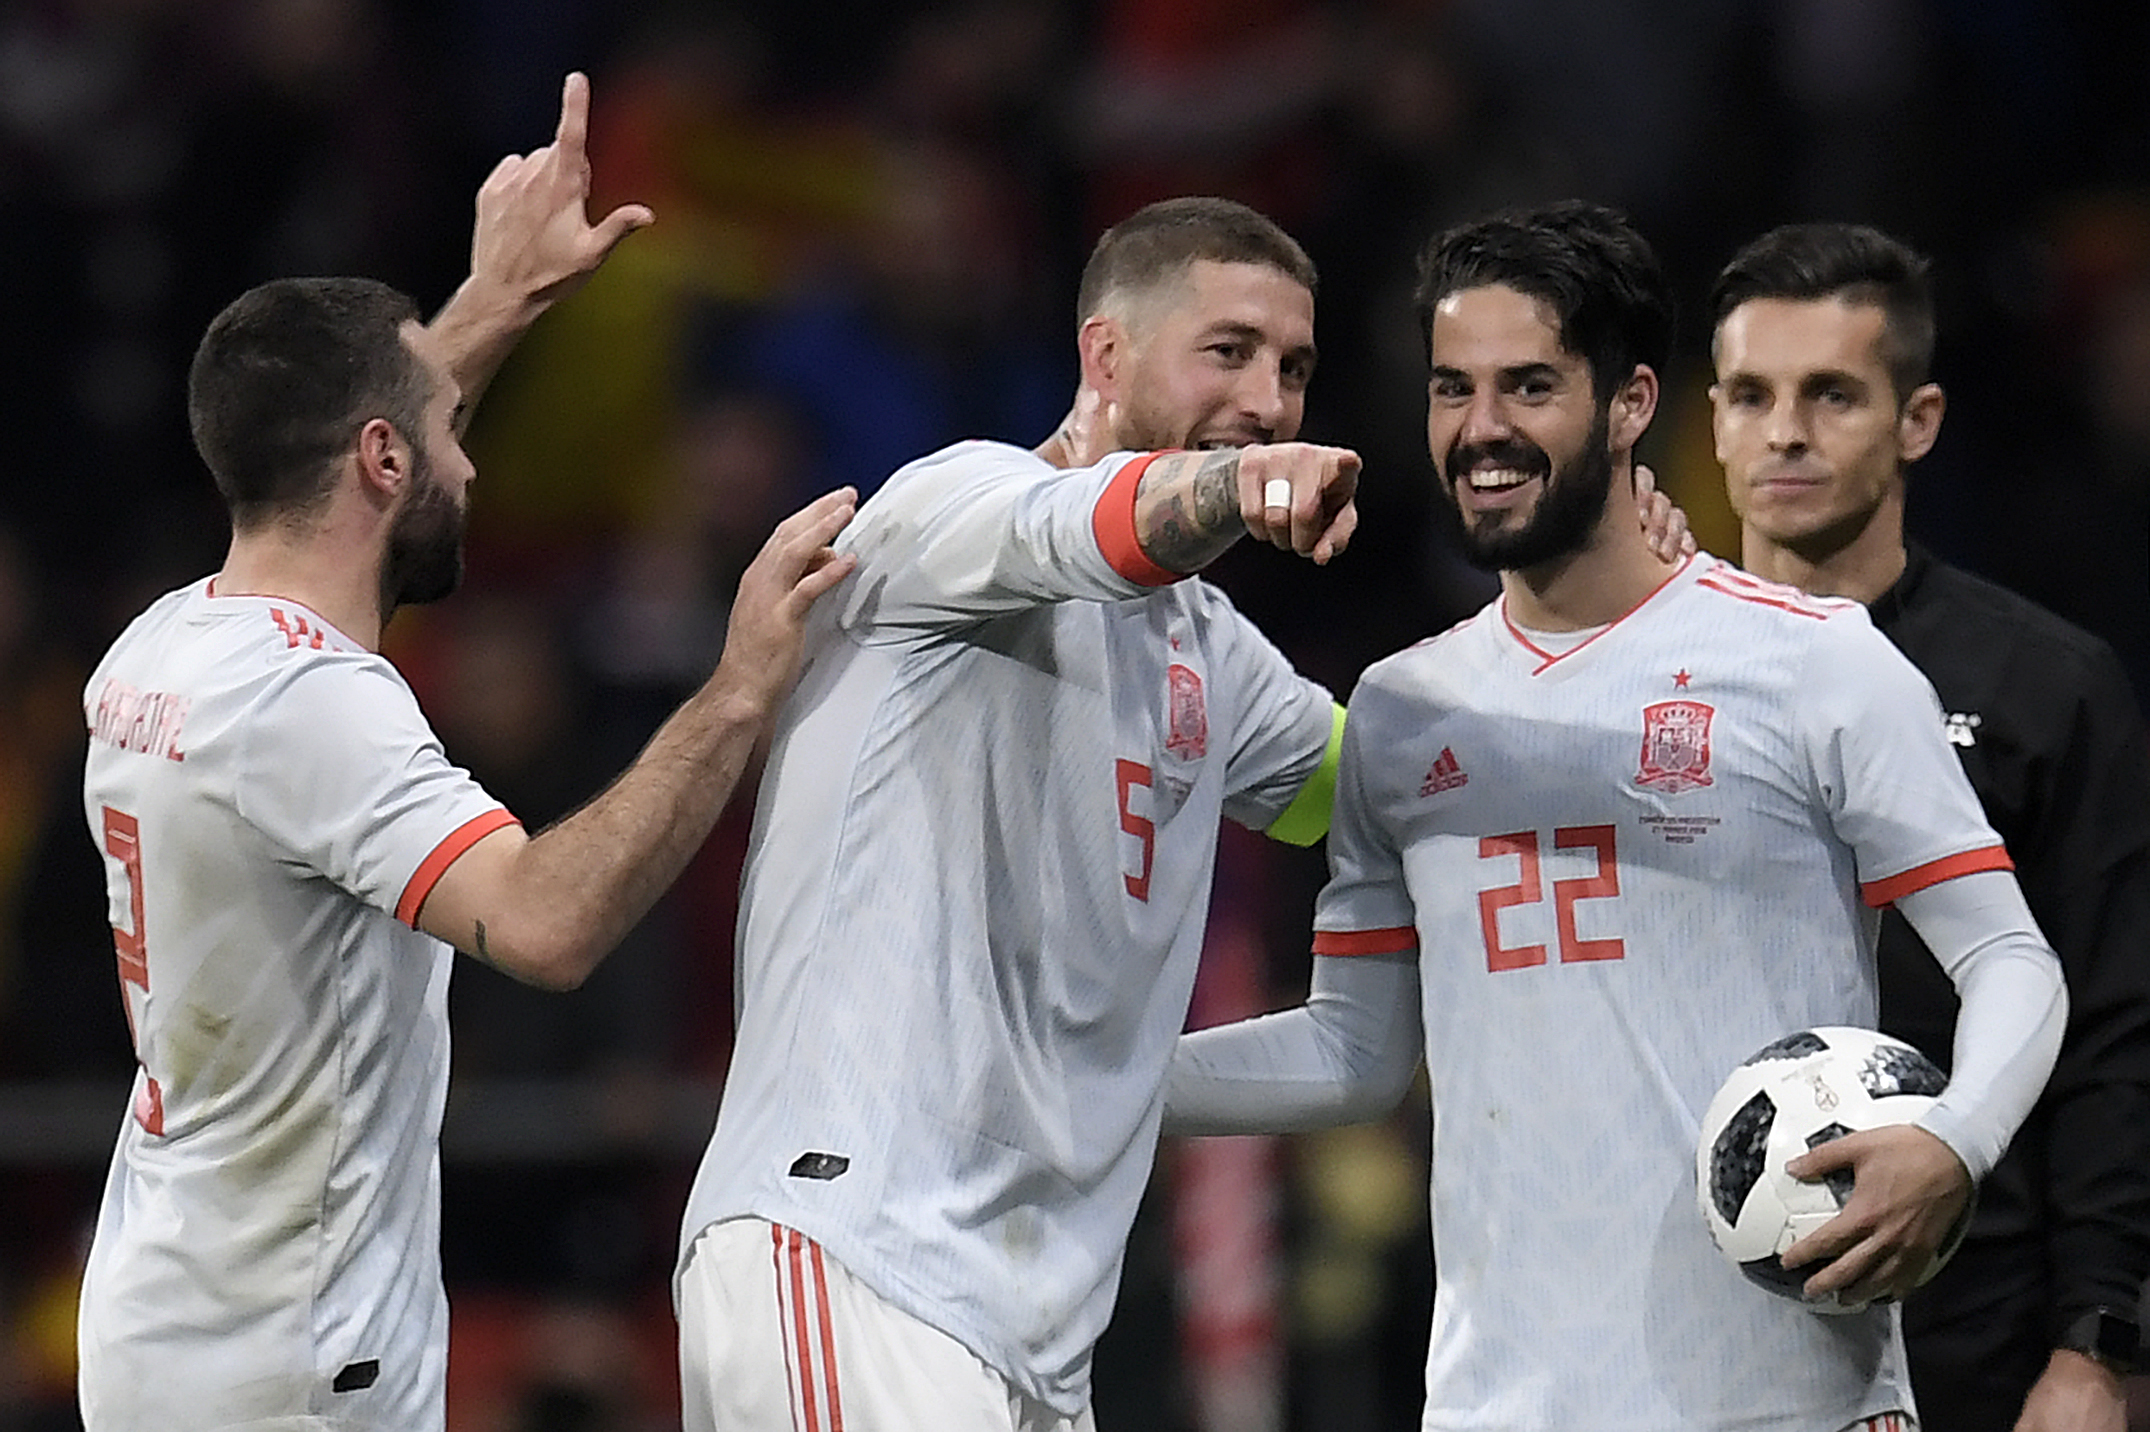 Spain's defender Dani Carvajal, Spain's defender Sergio Ramos and Spain's midfielder Isco celebrate after a friendly football match between Spain and Argentina at the Wanda Metropolitano Stadium in Madrid on March 27, 2018. / AFP PHOTO / GABRIEL BOUYS        (Photo credit should read GABRIEL BOUYS/AFP/Getty Images)